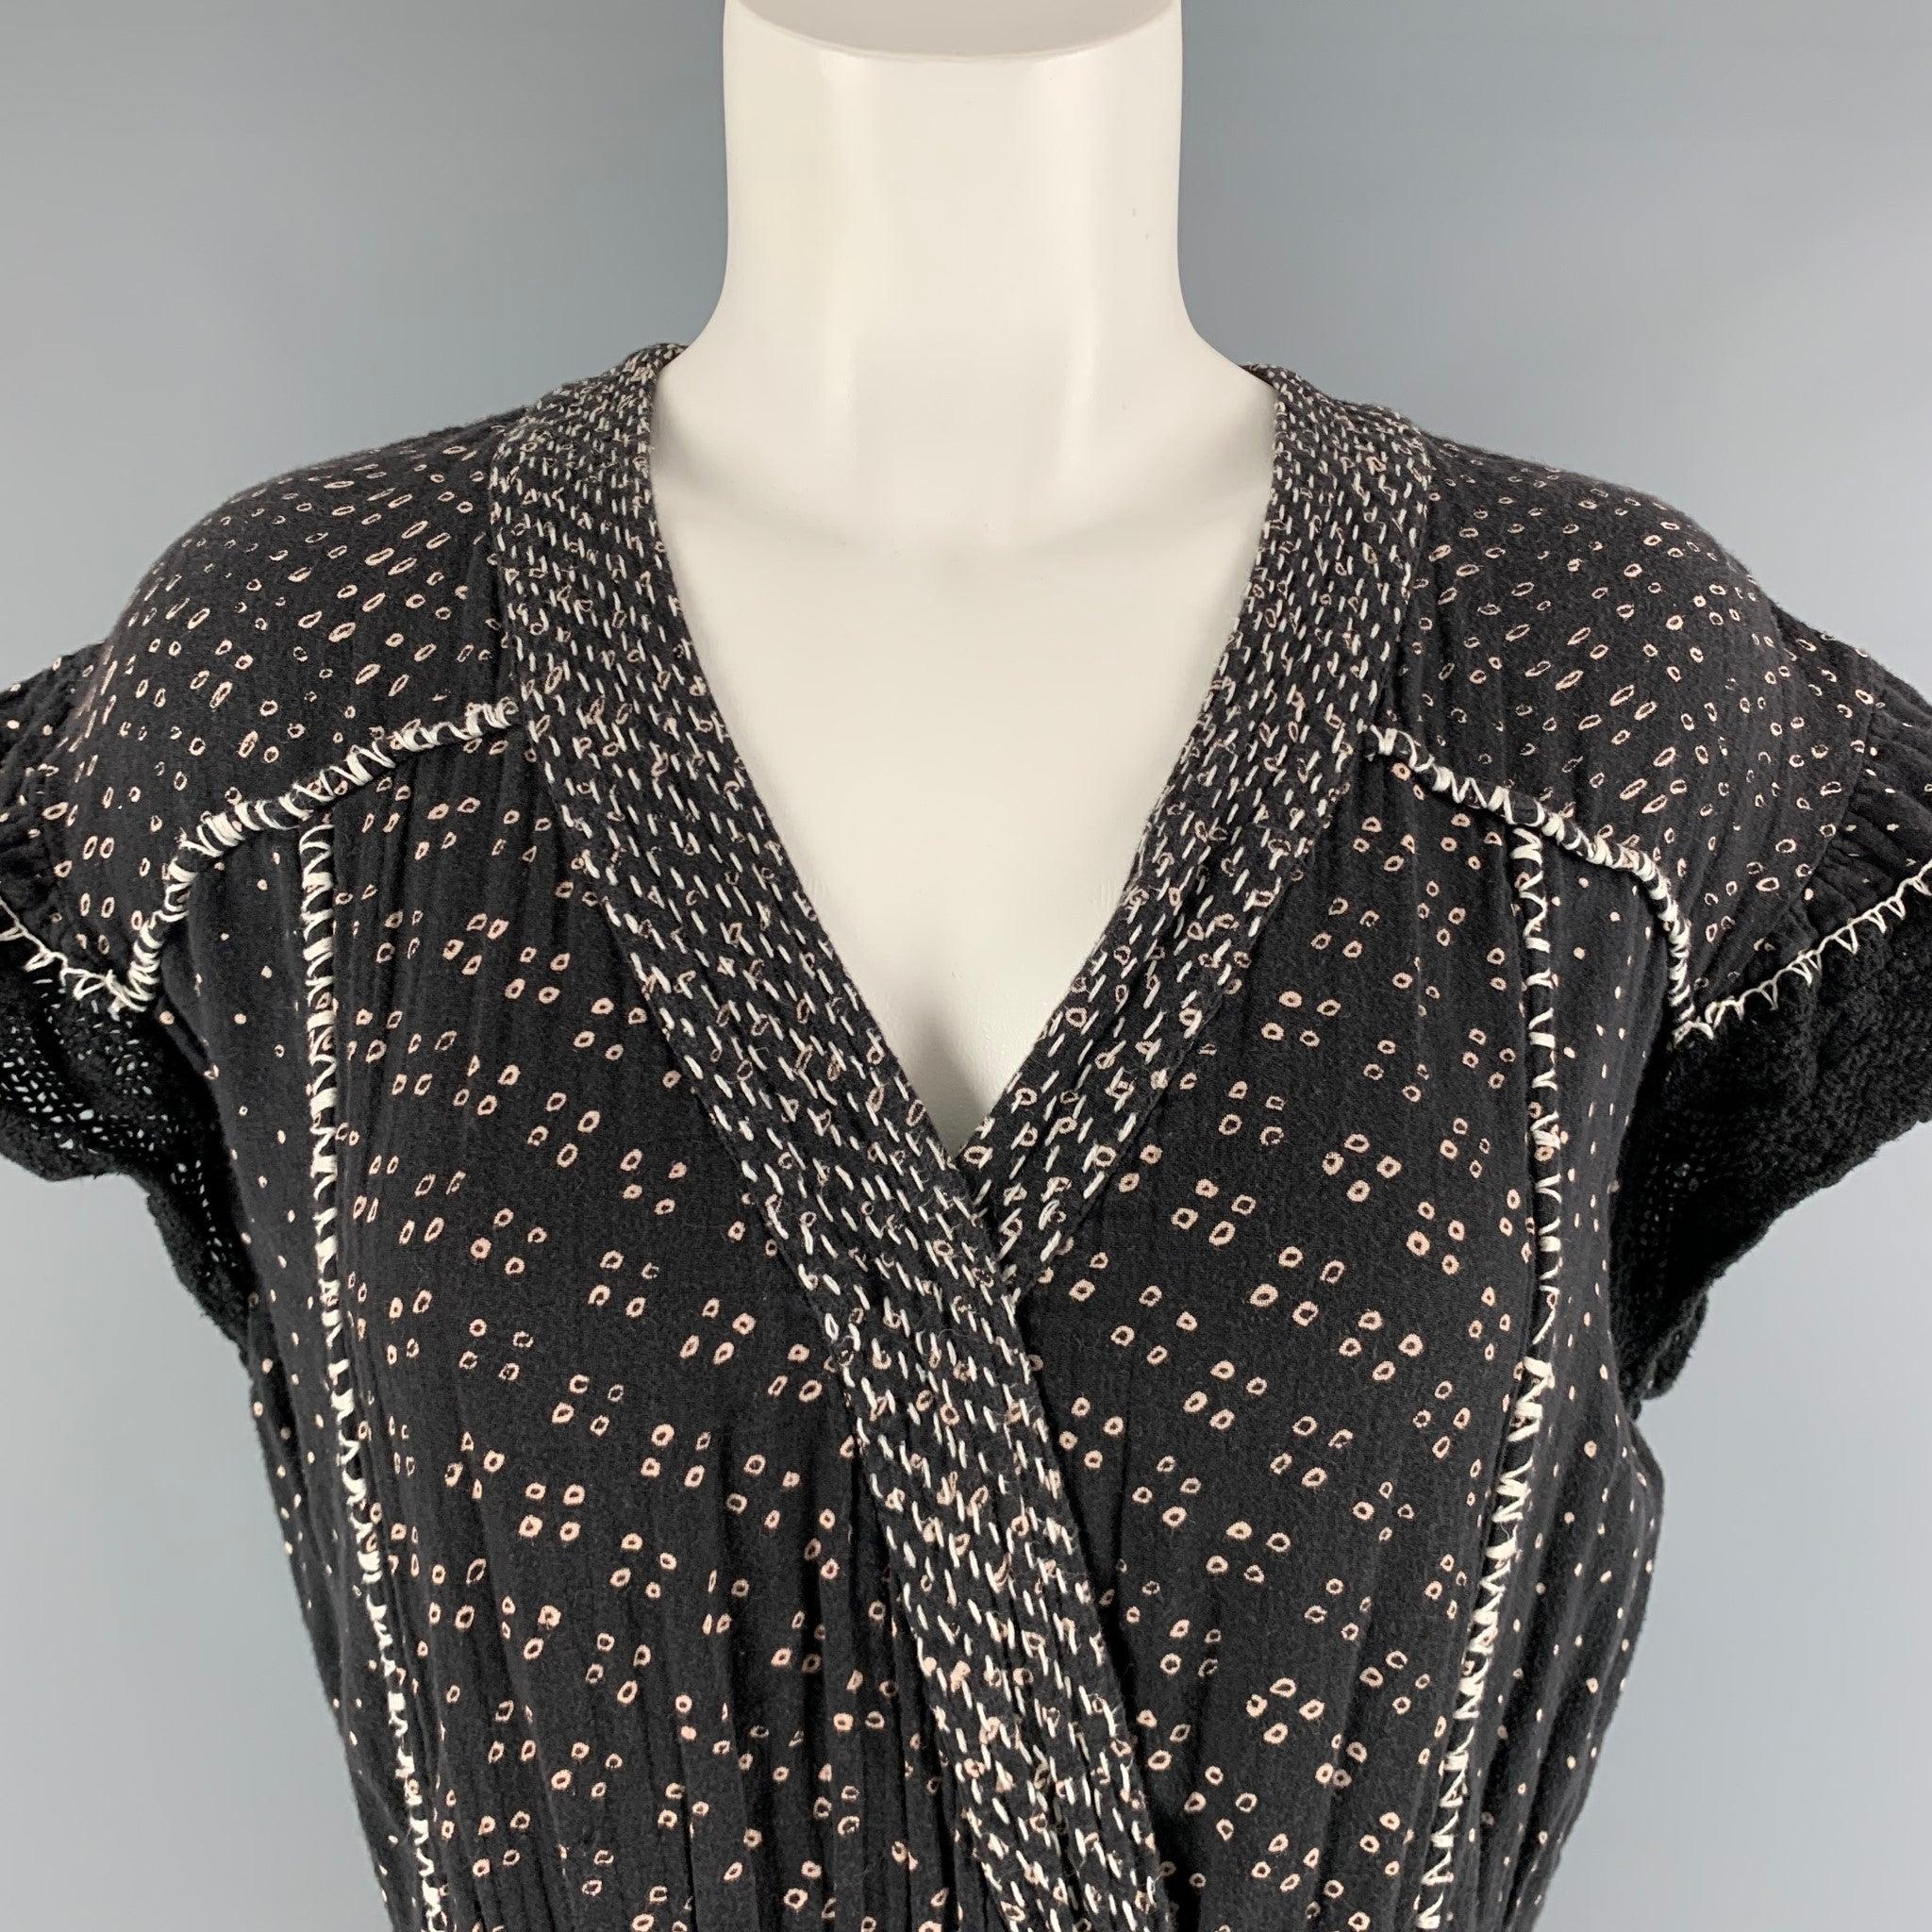 ULLA JOHNSON jumpsuit comes in cream and black cotton woven material featuring a
 V neckline,black crochet details at sleeves, elastic waist, pockets , and elastic hem at legs. Good Pre-Owned Condition. Moderate signs of wear, and color fading.